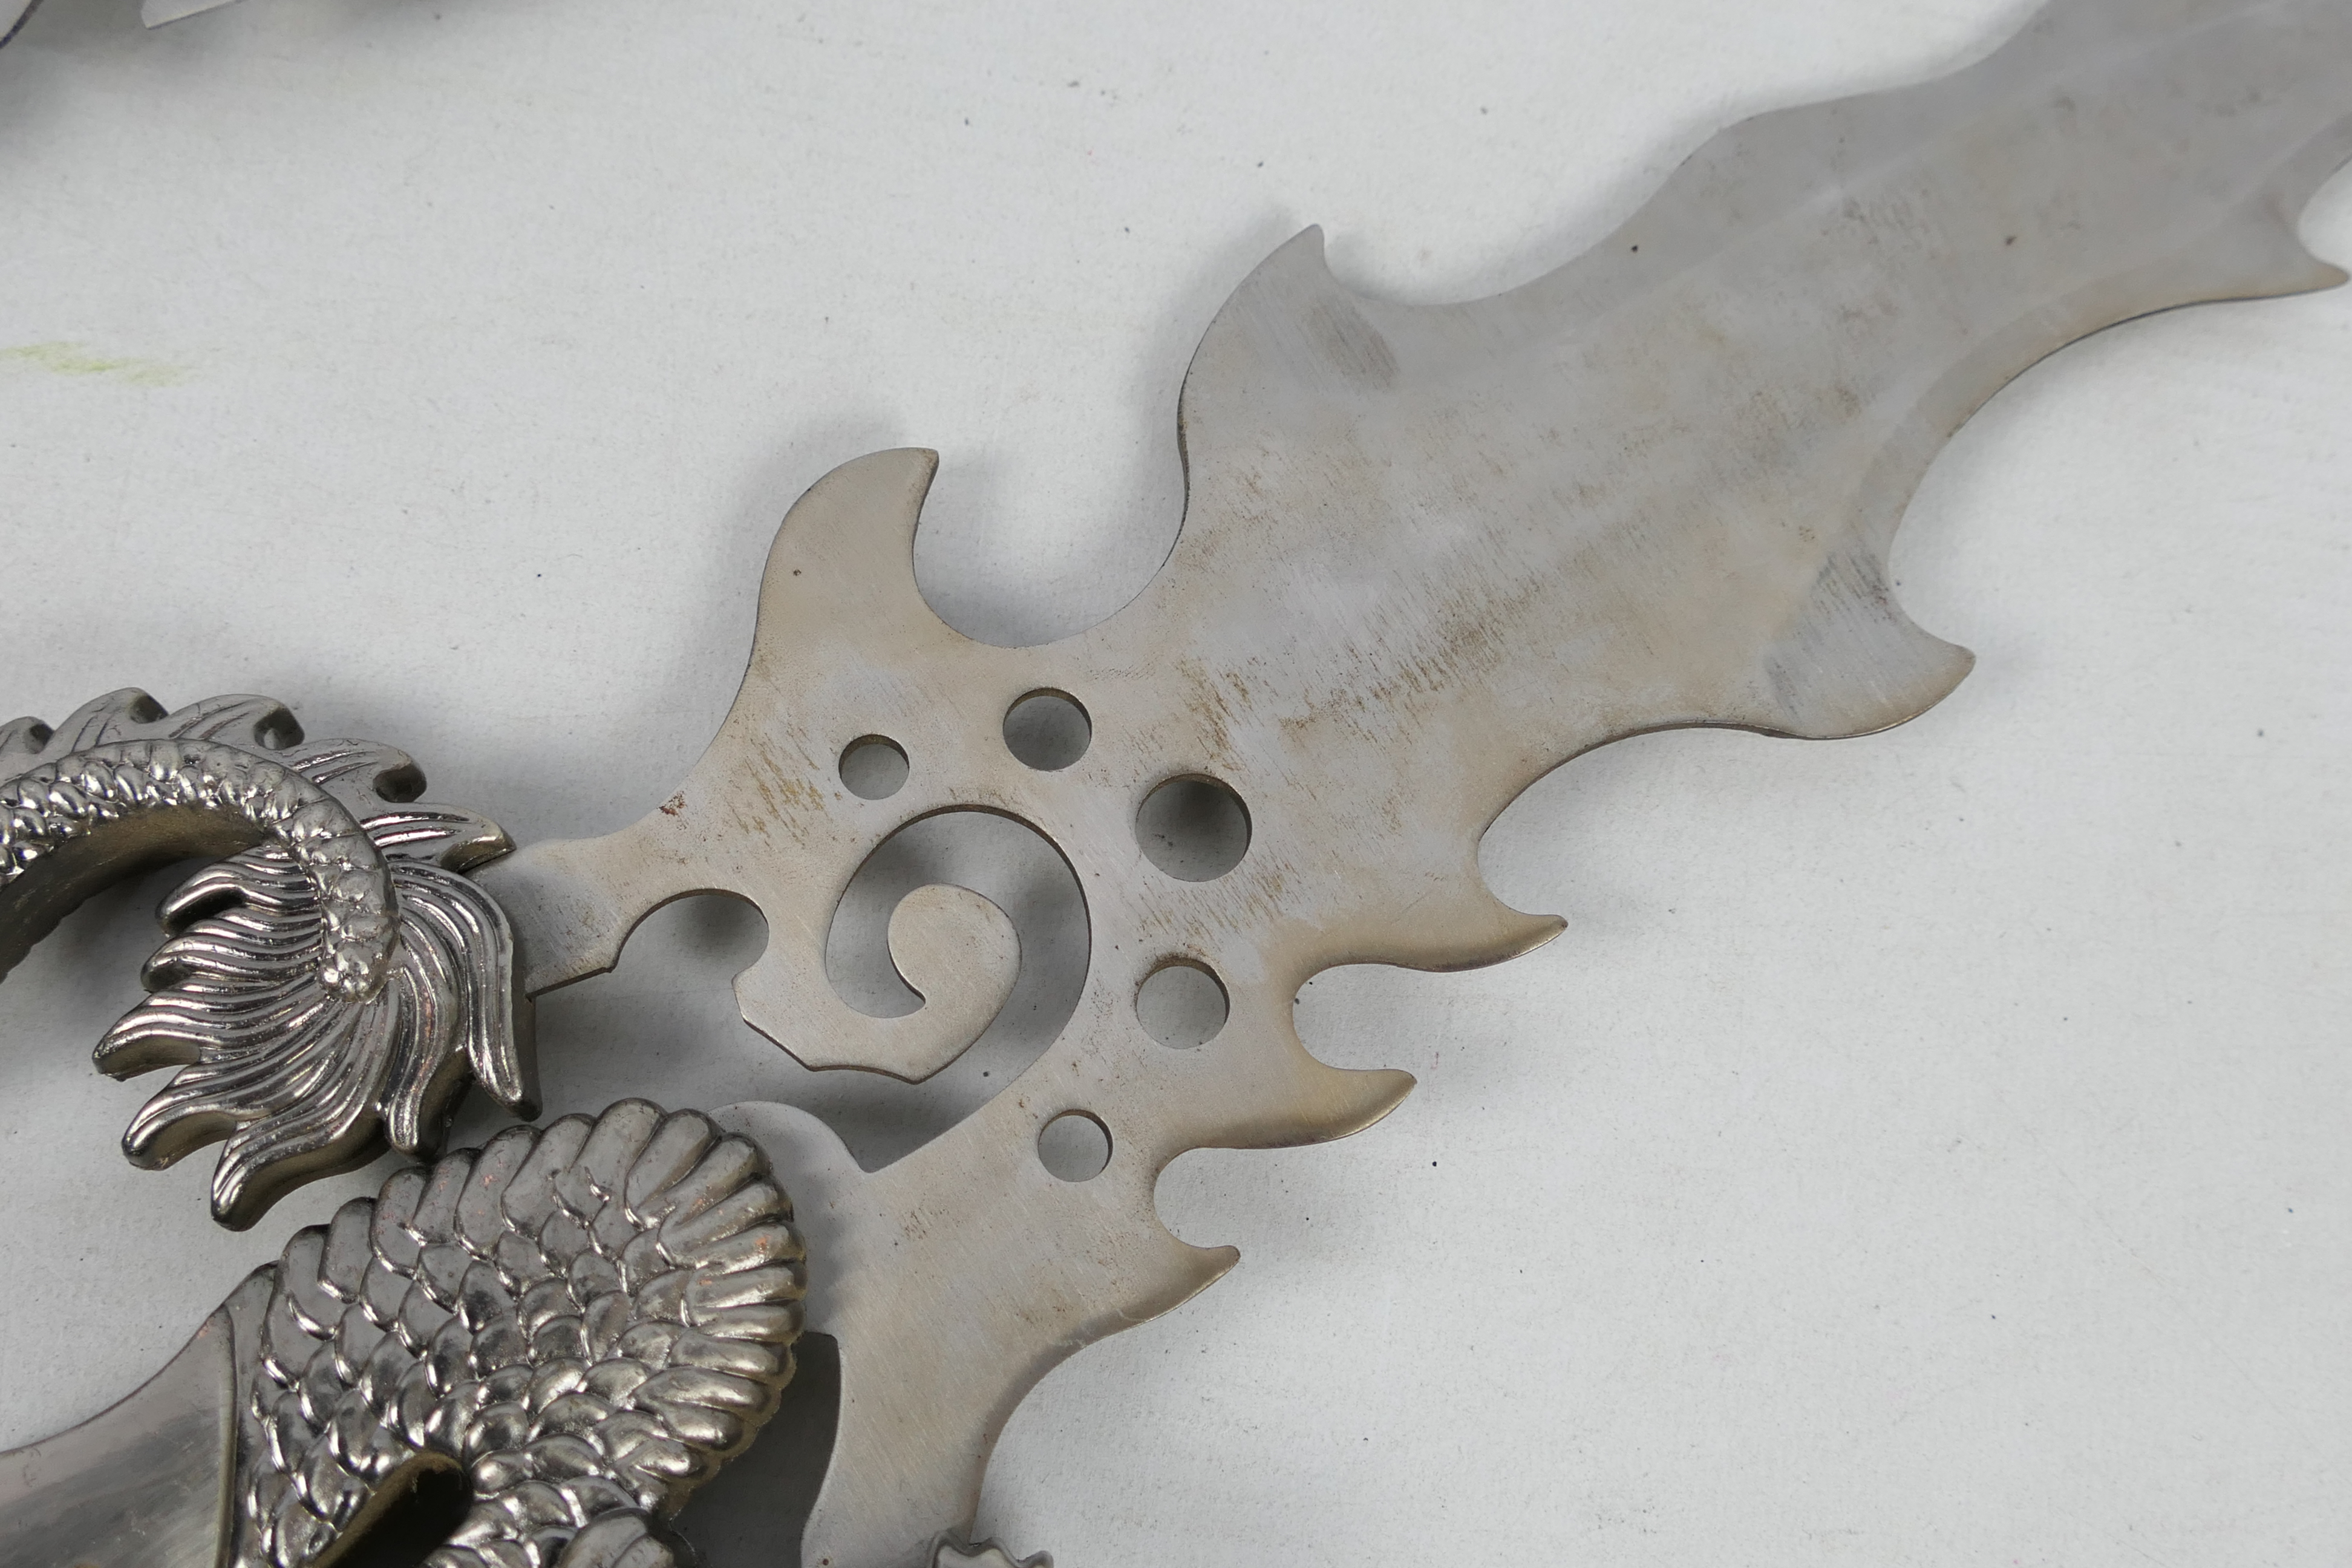 Two decorative Fantasy blades with dragon form hilts, approximately 55 cm (l). - Image 5 of 6